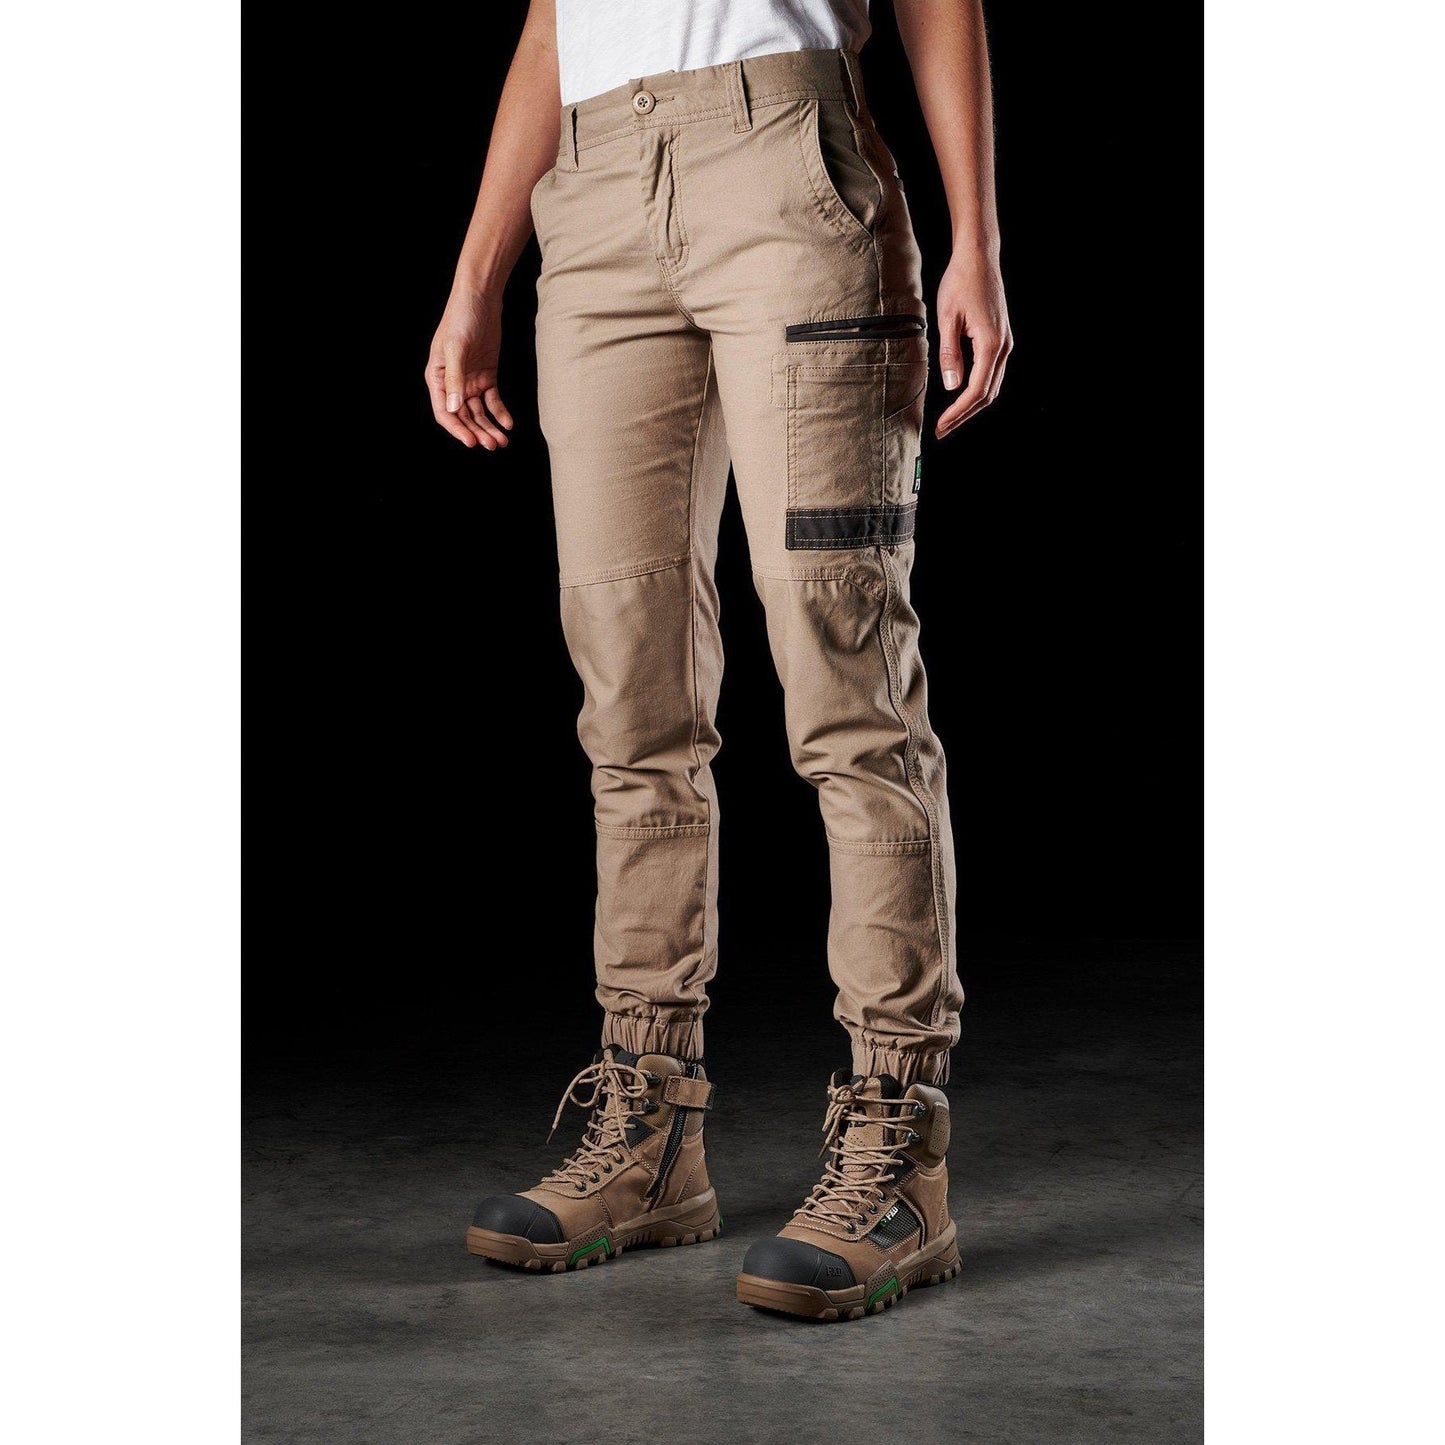 FXD Womens Stretched Cuffed Work Pants - WP-4W | Womens Workwear